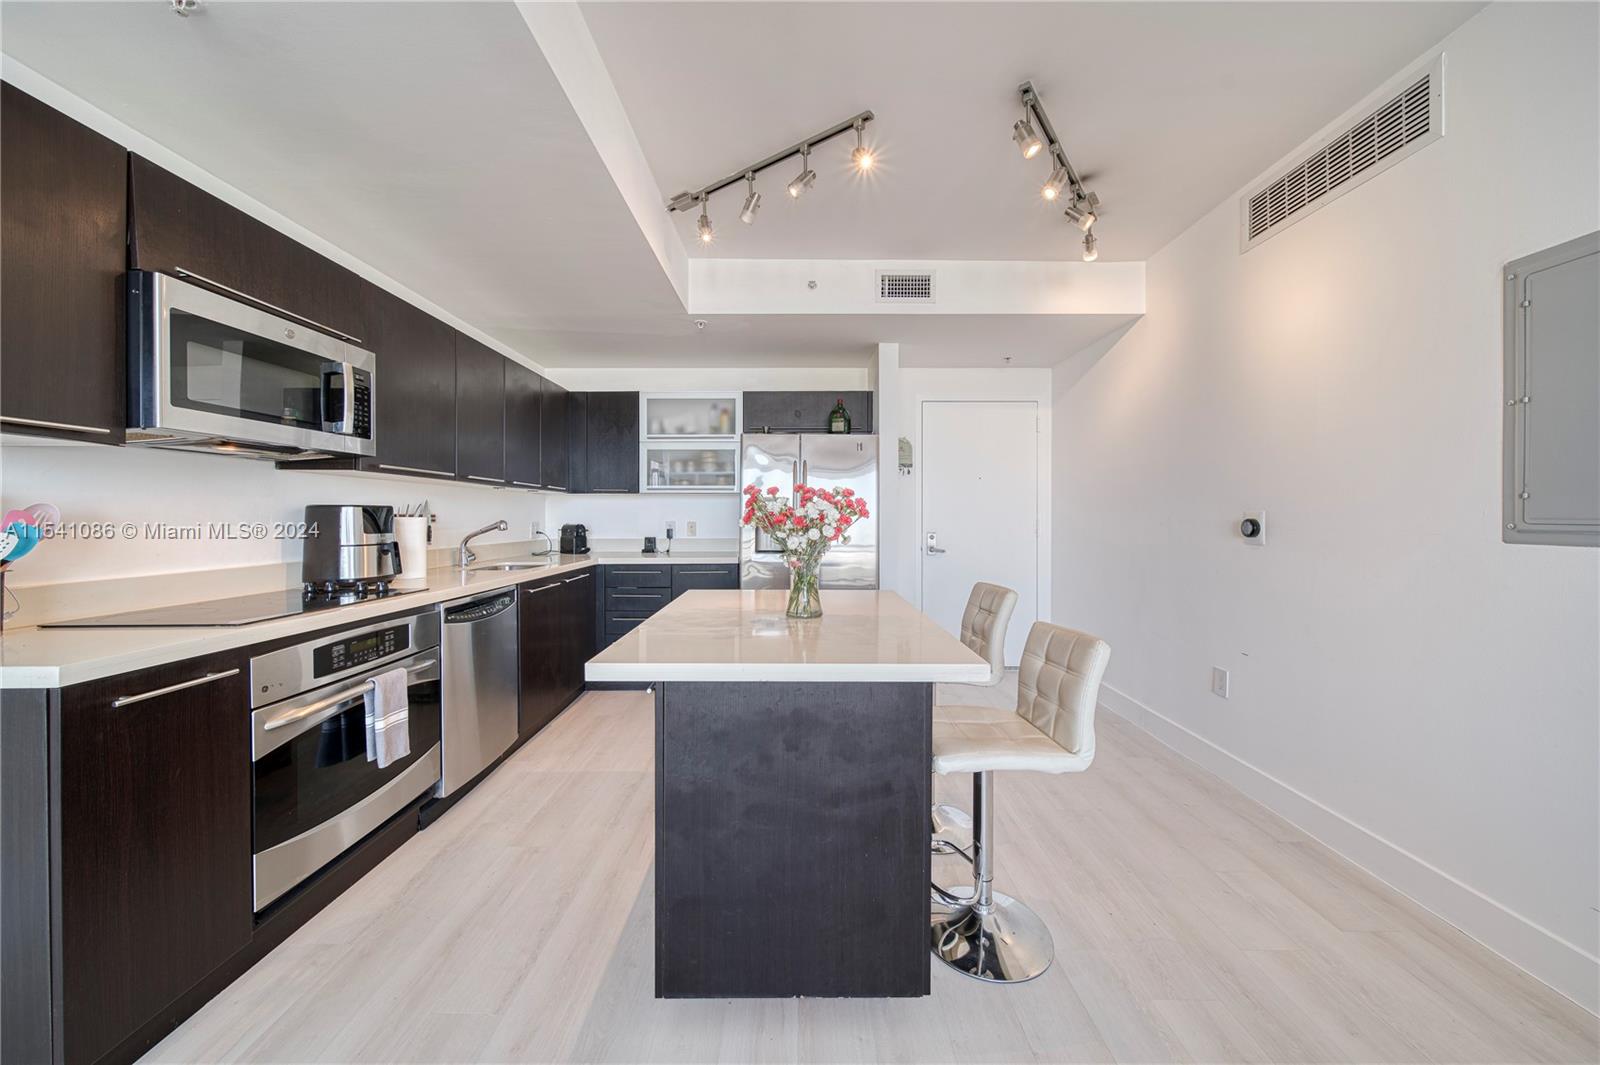 a kitchen with stainless steel appliances kitchen island granite countertop a table chairs in it and a window